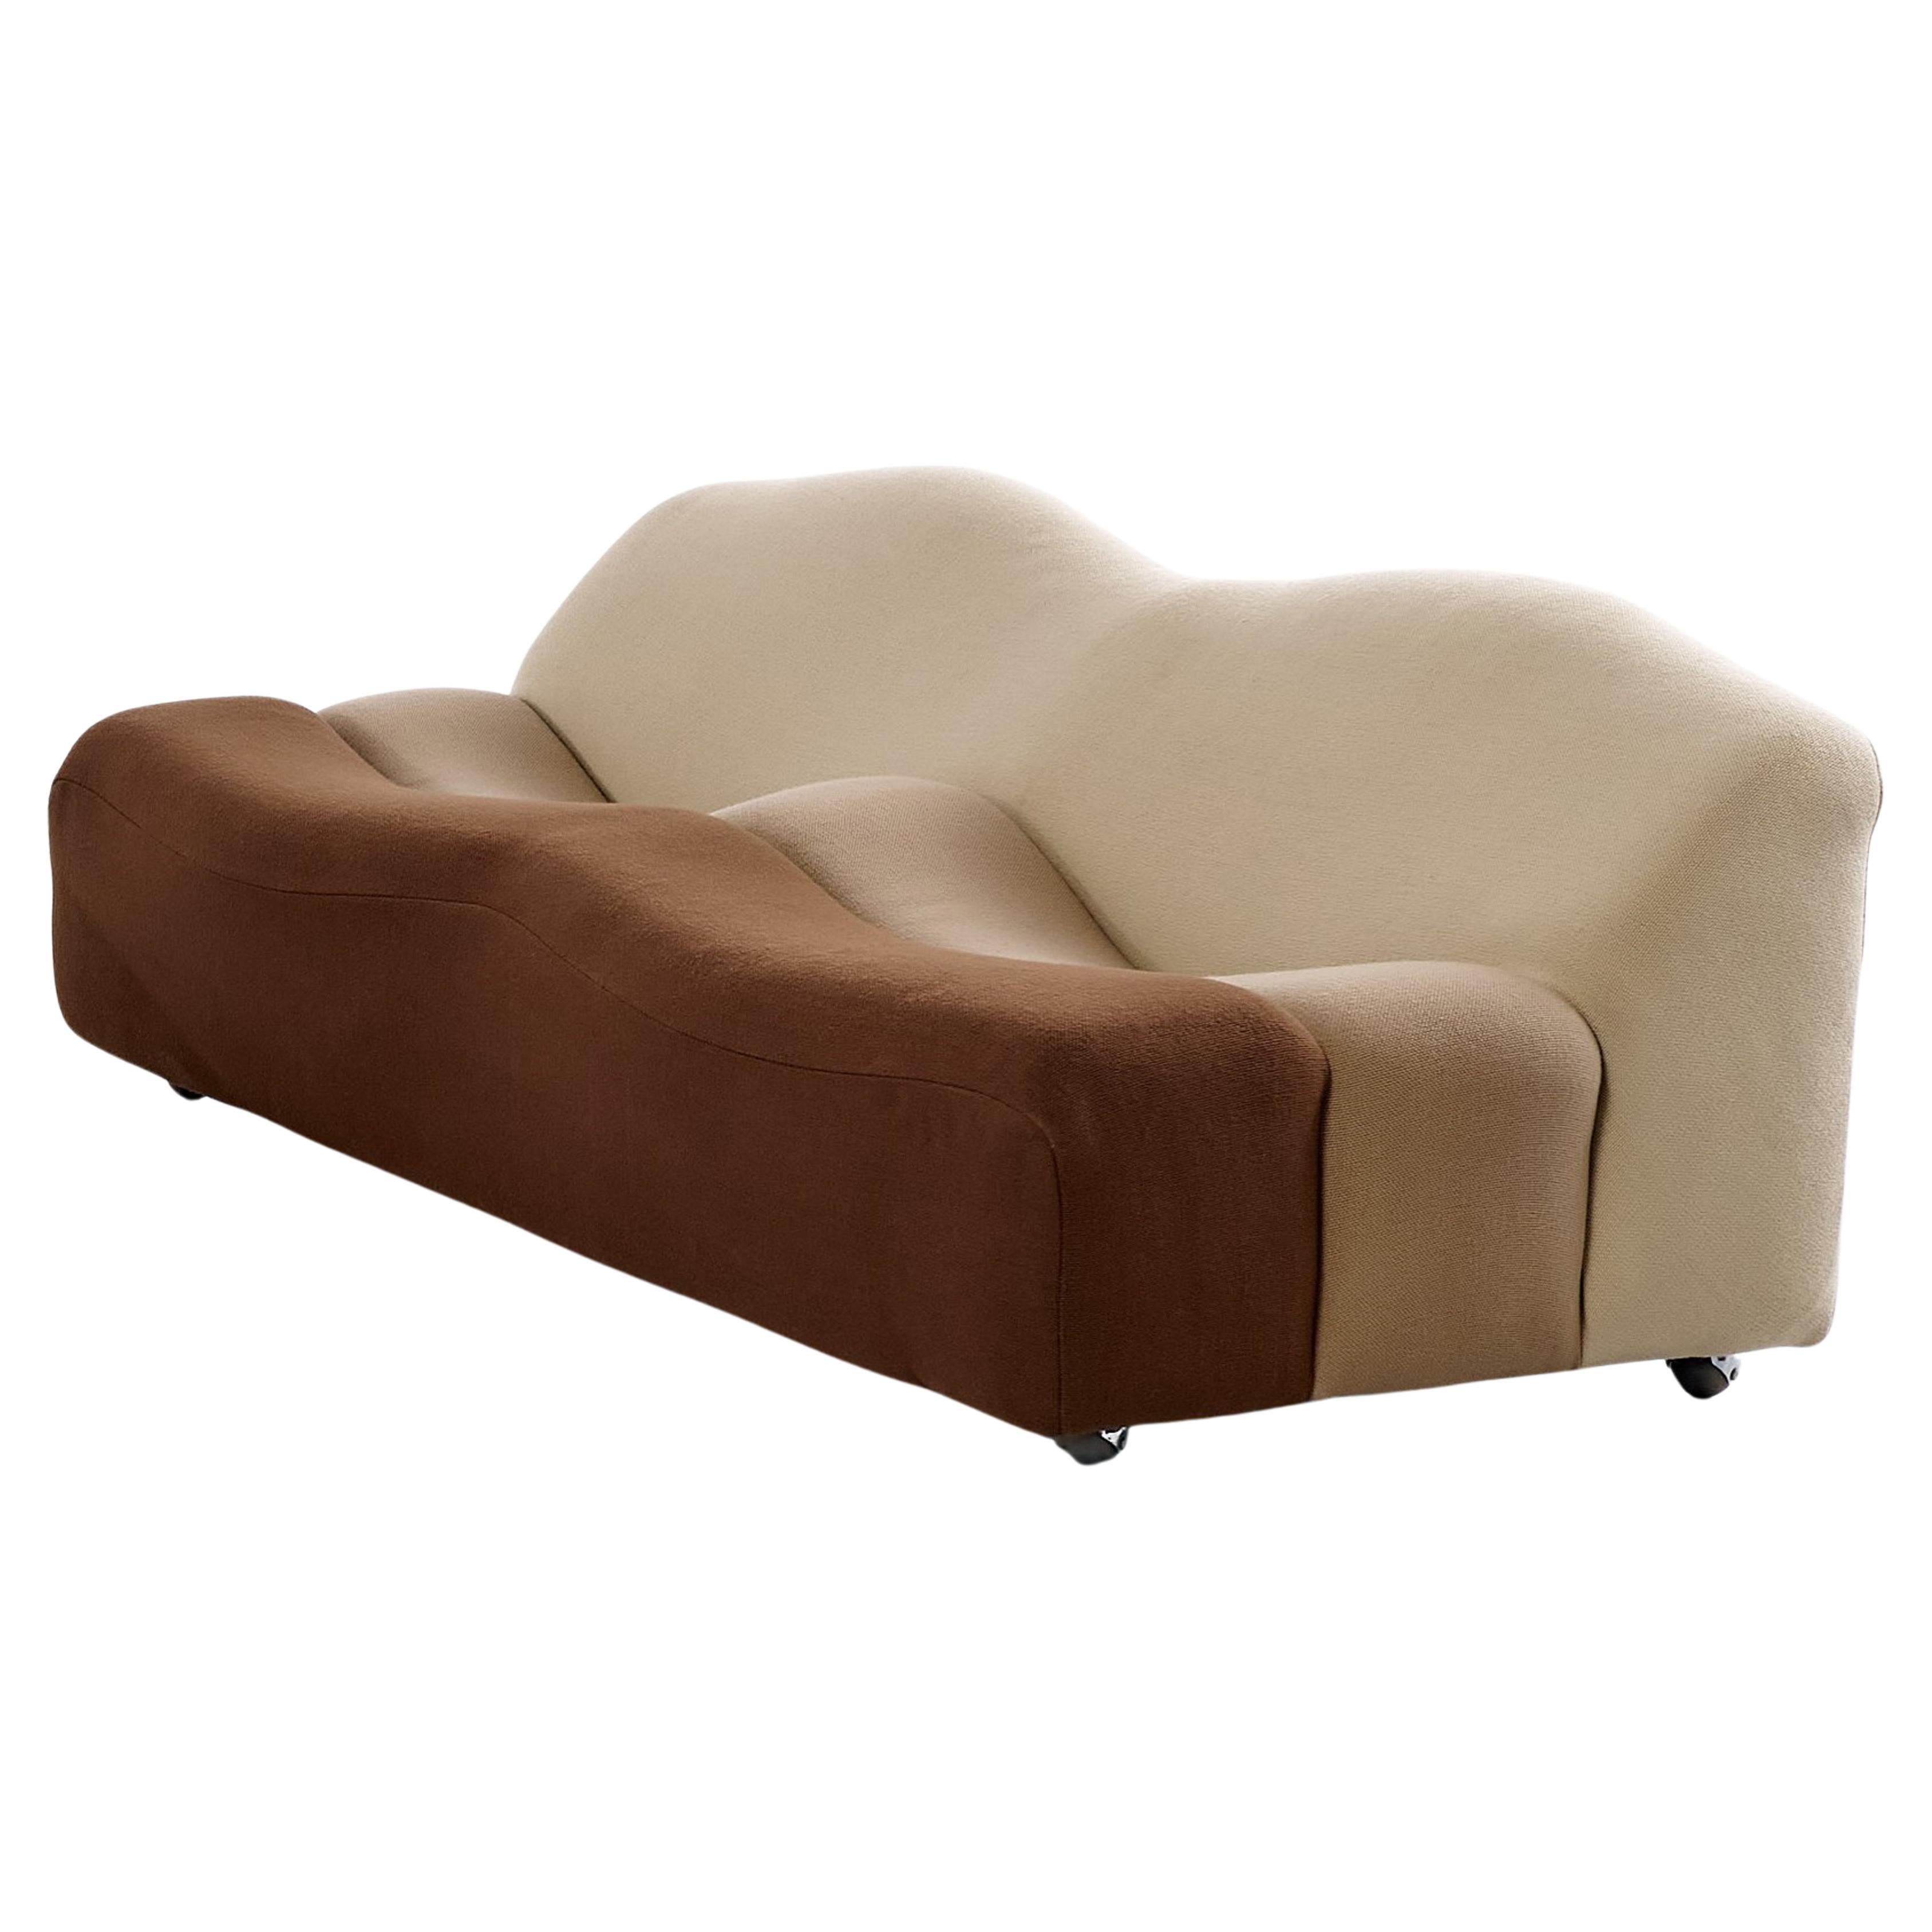 ABCD 2 Seater sofa by Pierre Paulin for Artifort, Netherlands, 1969 For Sale